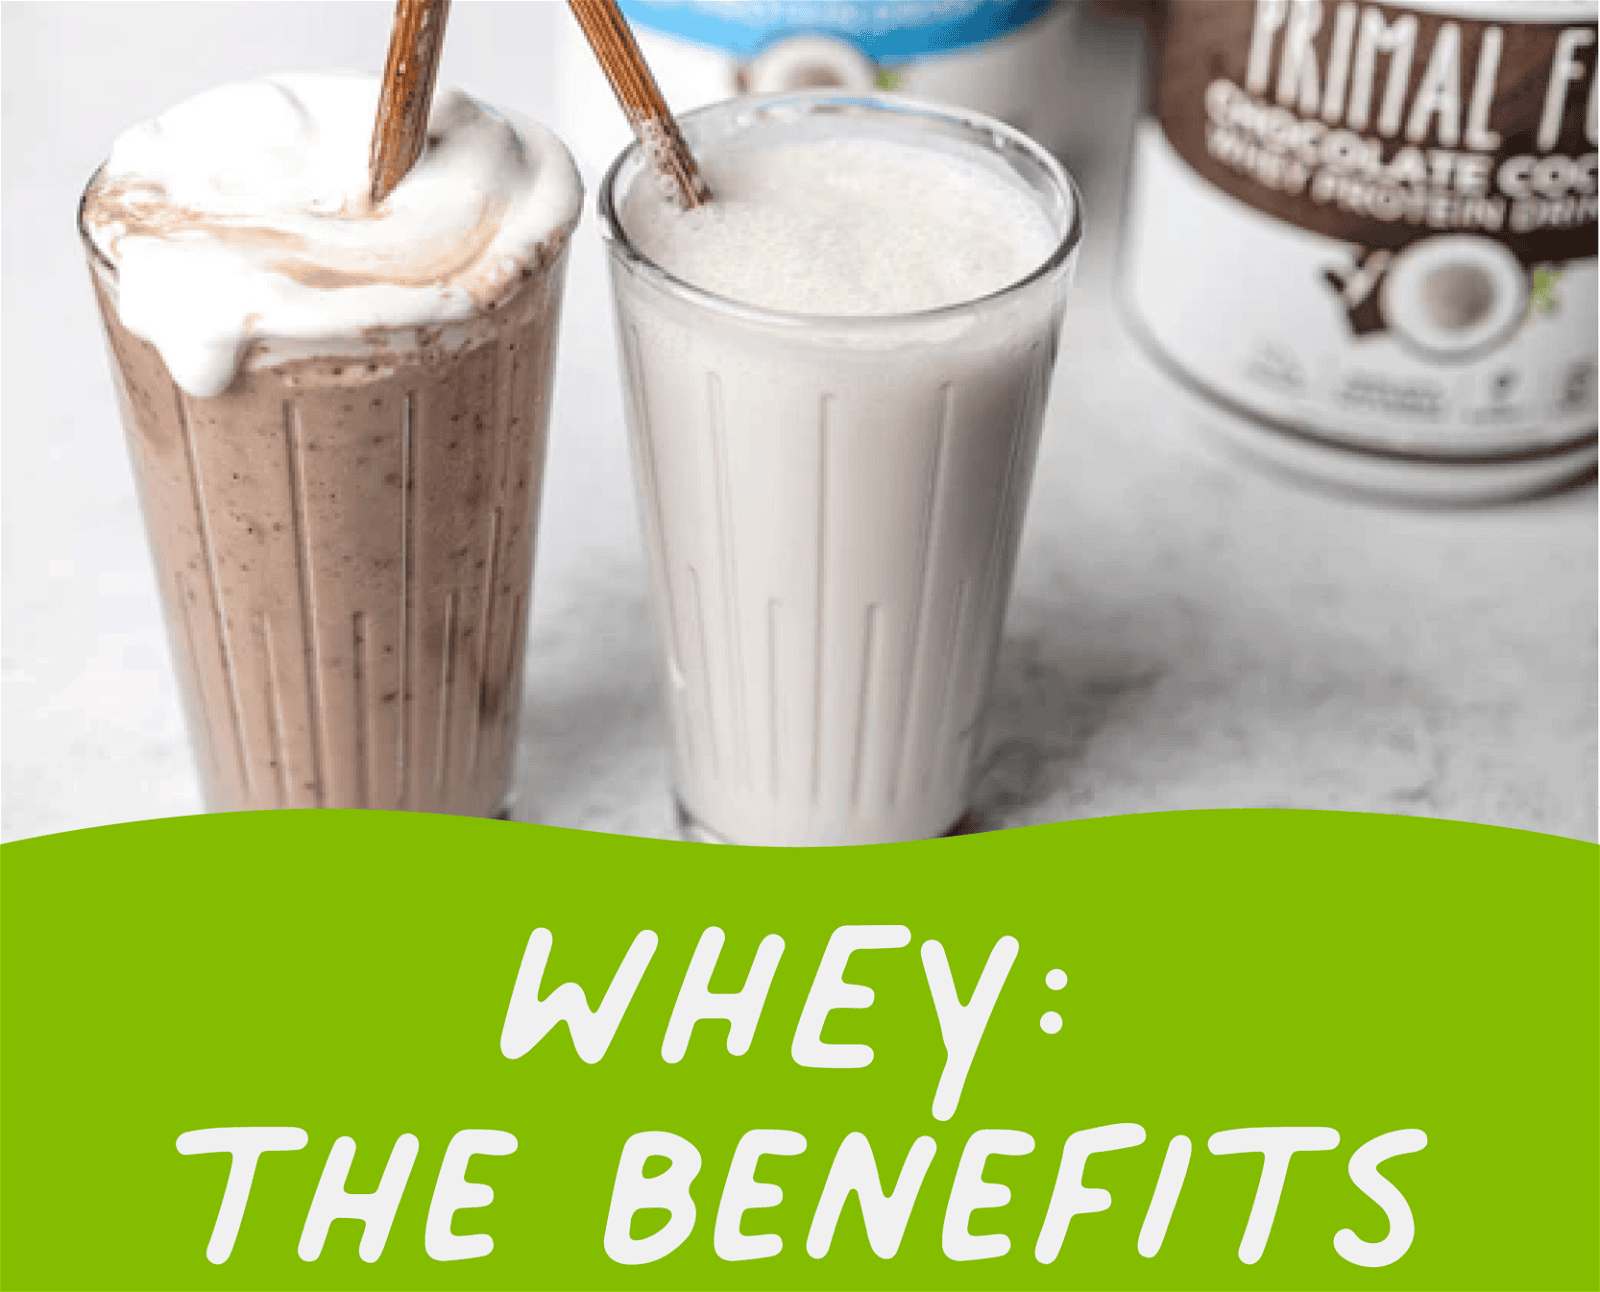 Whey: The Benefits